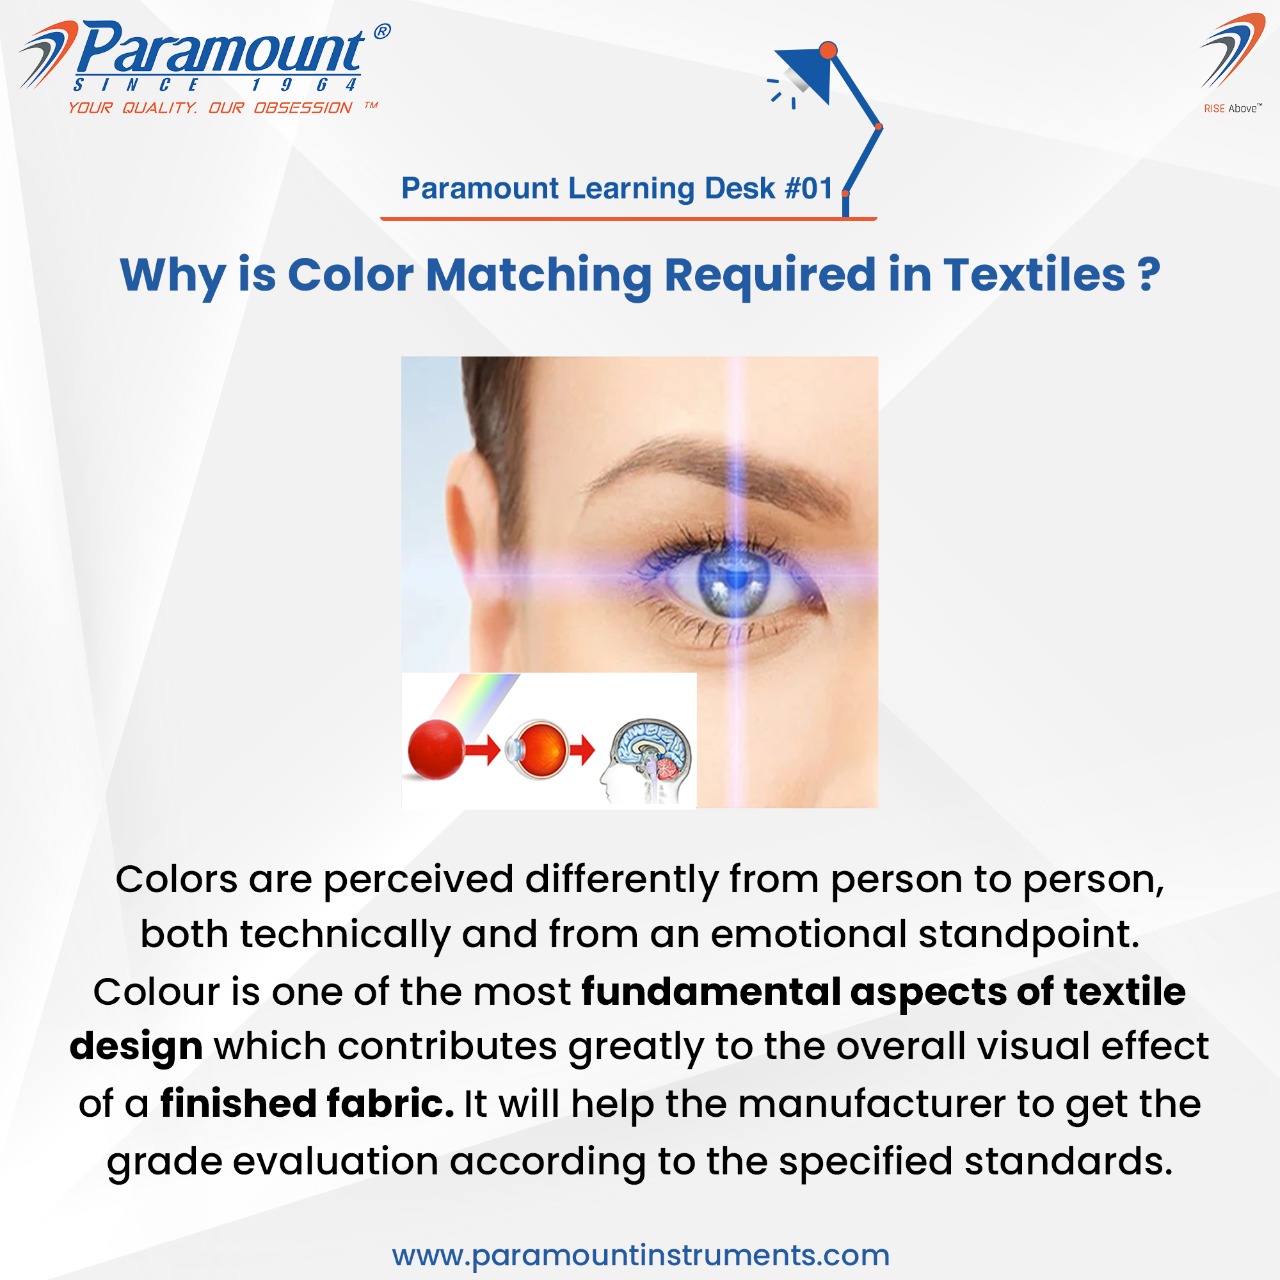 7 Paramount

NER 75 oe

7

 

@- 9D

 

Colors are perceived differently from person to person,
both technically and from an emotional standpoint.
Colour is one of the most fundamental aspects of textile
design which contributes greatly to the overall visual effect
of a finished fabric. It will help the manufacturer to get the
grade evaluation according to the specified standards.

www.paramountinstruments.com